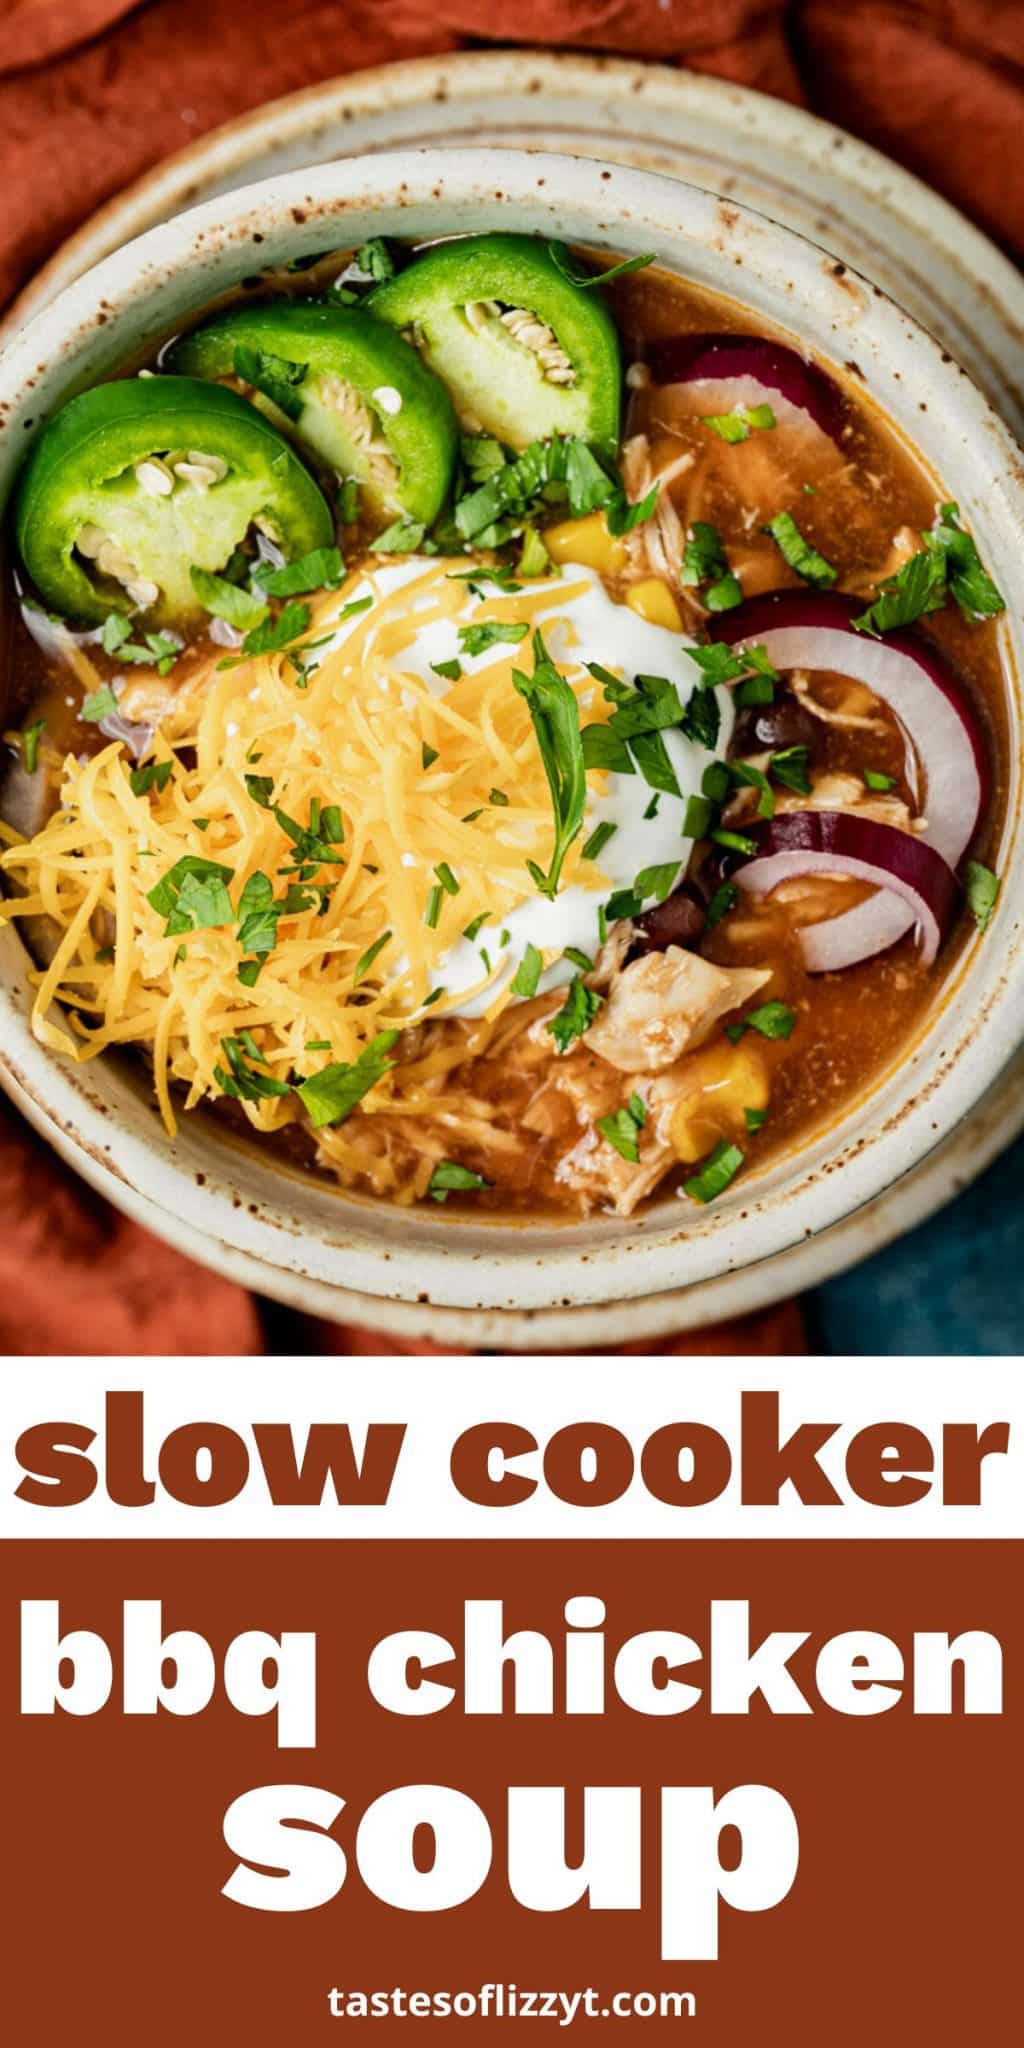 Slow Cooker BBQ Chicken Soup | Tastes of Lizzy T